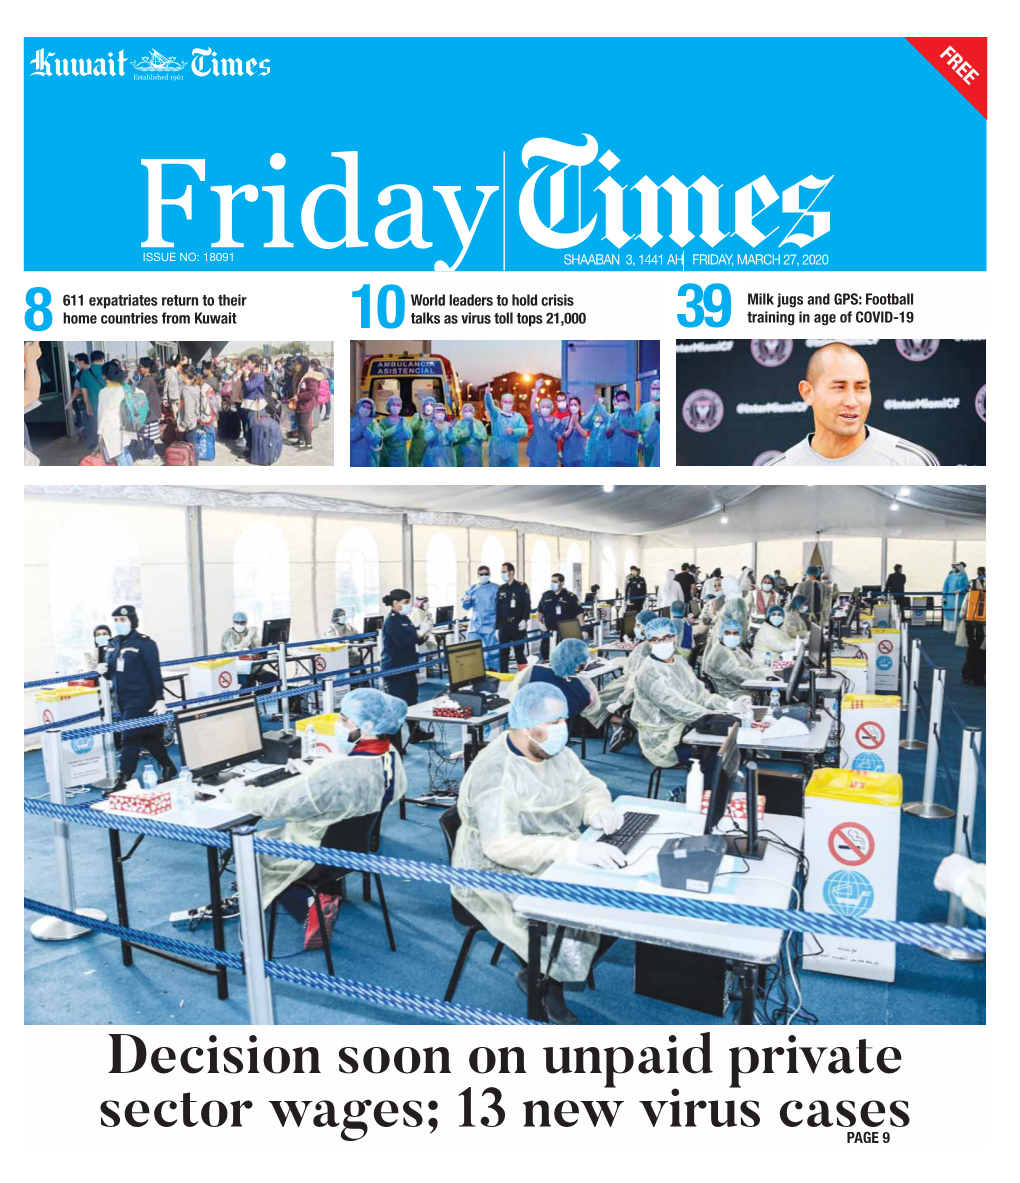 Decision Soon on Unpaid Private Sector Wages; 13 New Virus Cases PAGE 9 2 Friday Local Friday, March 27, 2020 Curfew Diaries: Day 4 - Curfew Breakers